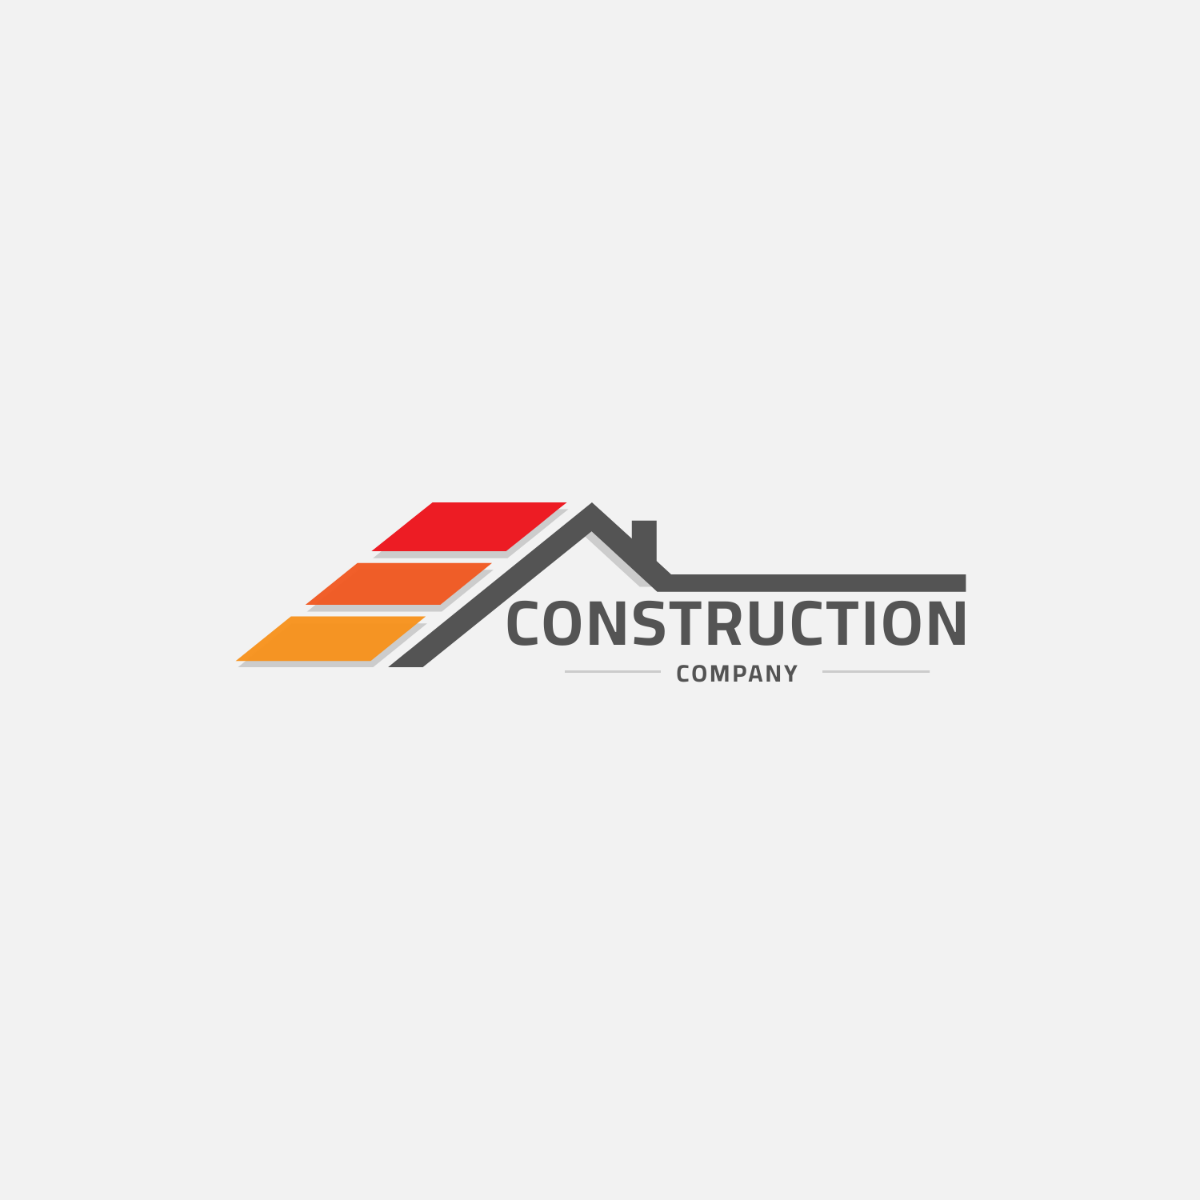 Siding and Roofing Construction Company Logo Template